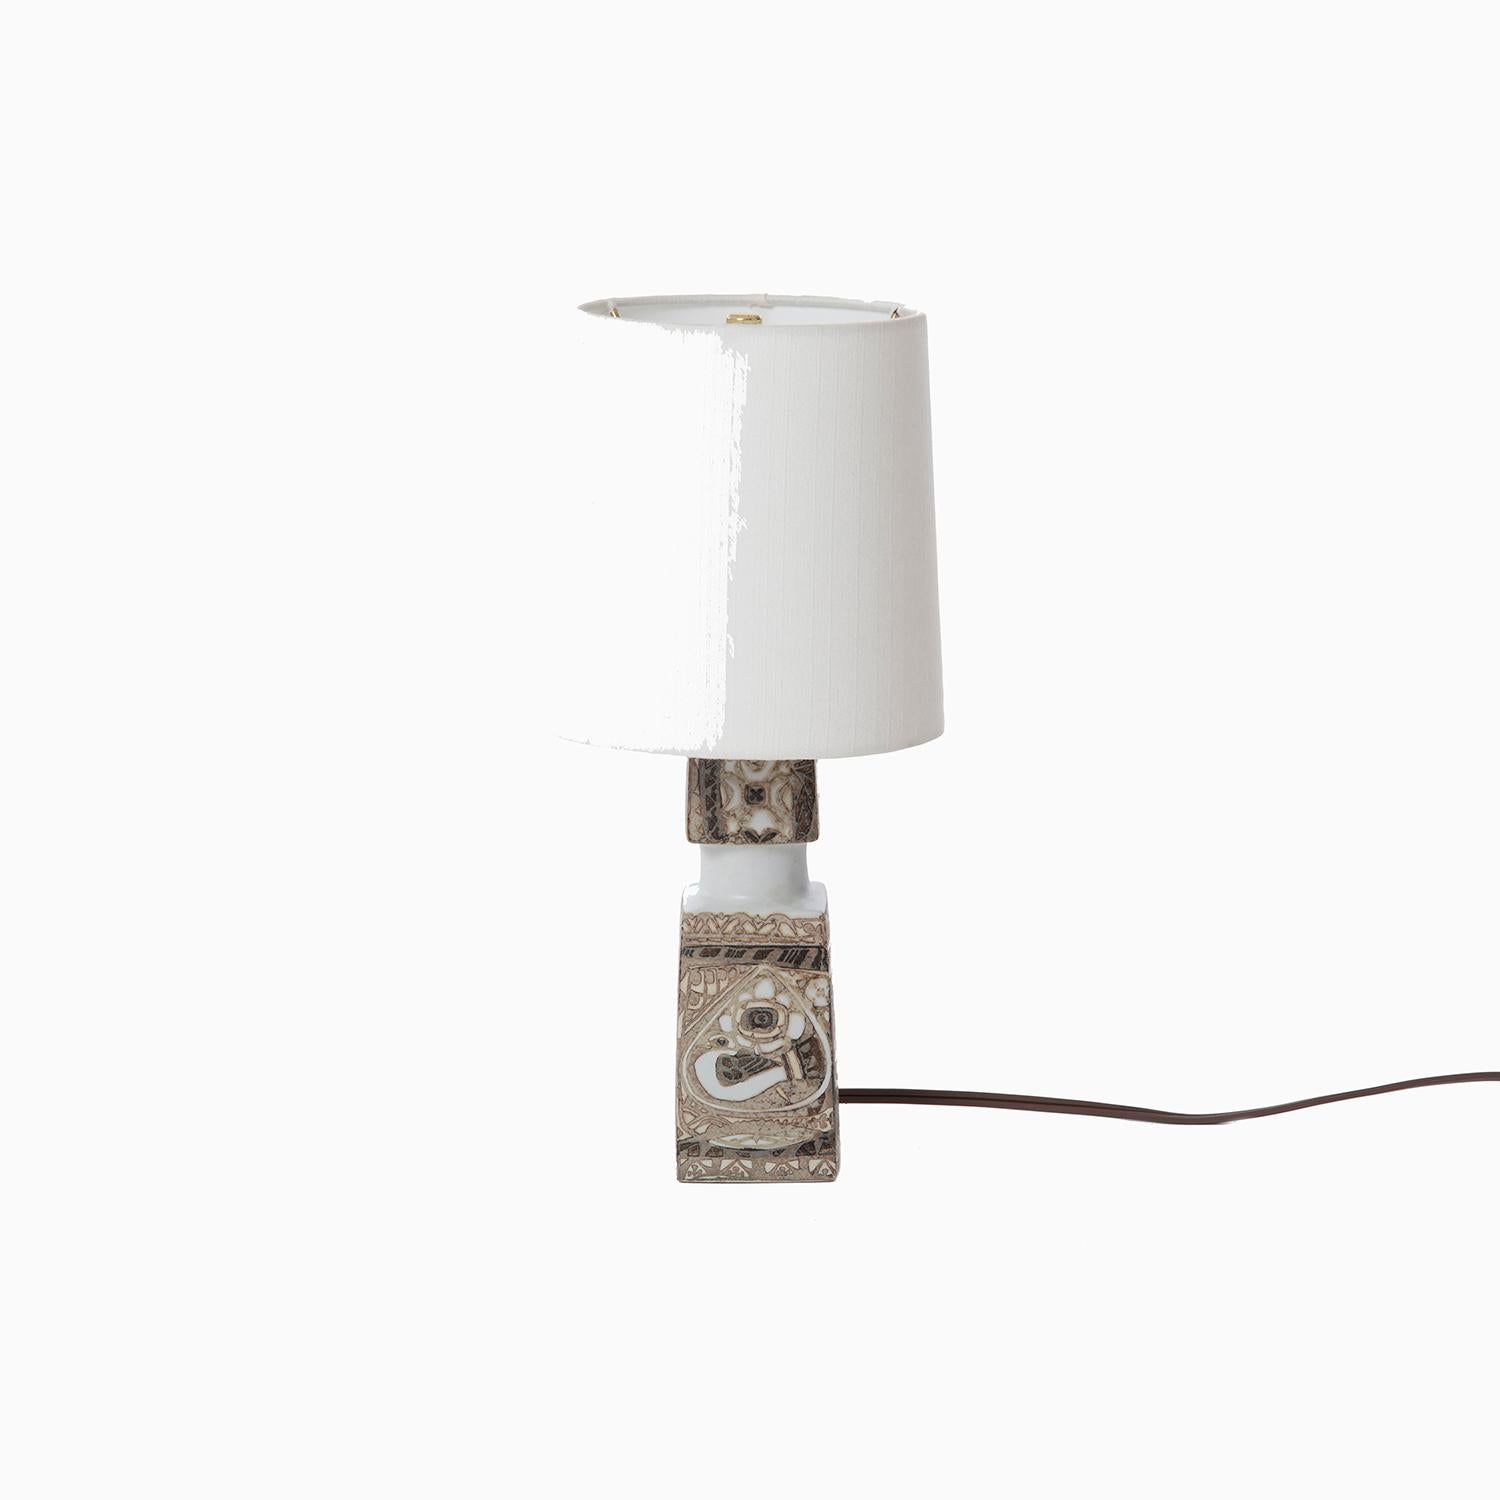 Danish modern Royal Copenhagen pottery lamp designed by Nils Thorsson for Føg & Morup.


Professional, skilled furniture restoration is an integral part of what we do every day. Our goal 
is to provide beautiful, functional furniture that honors